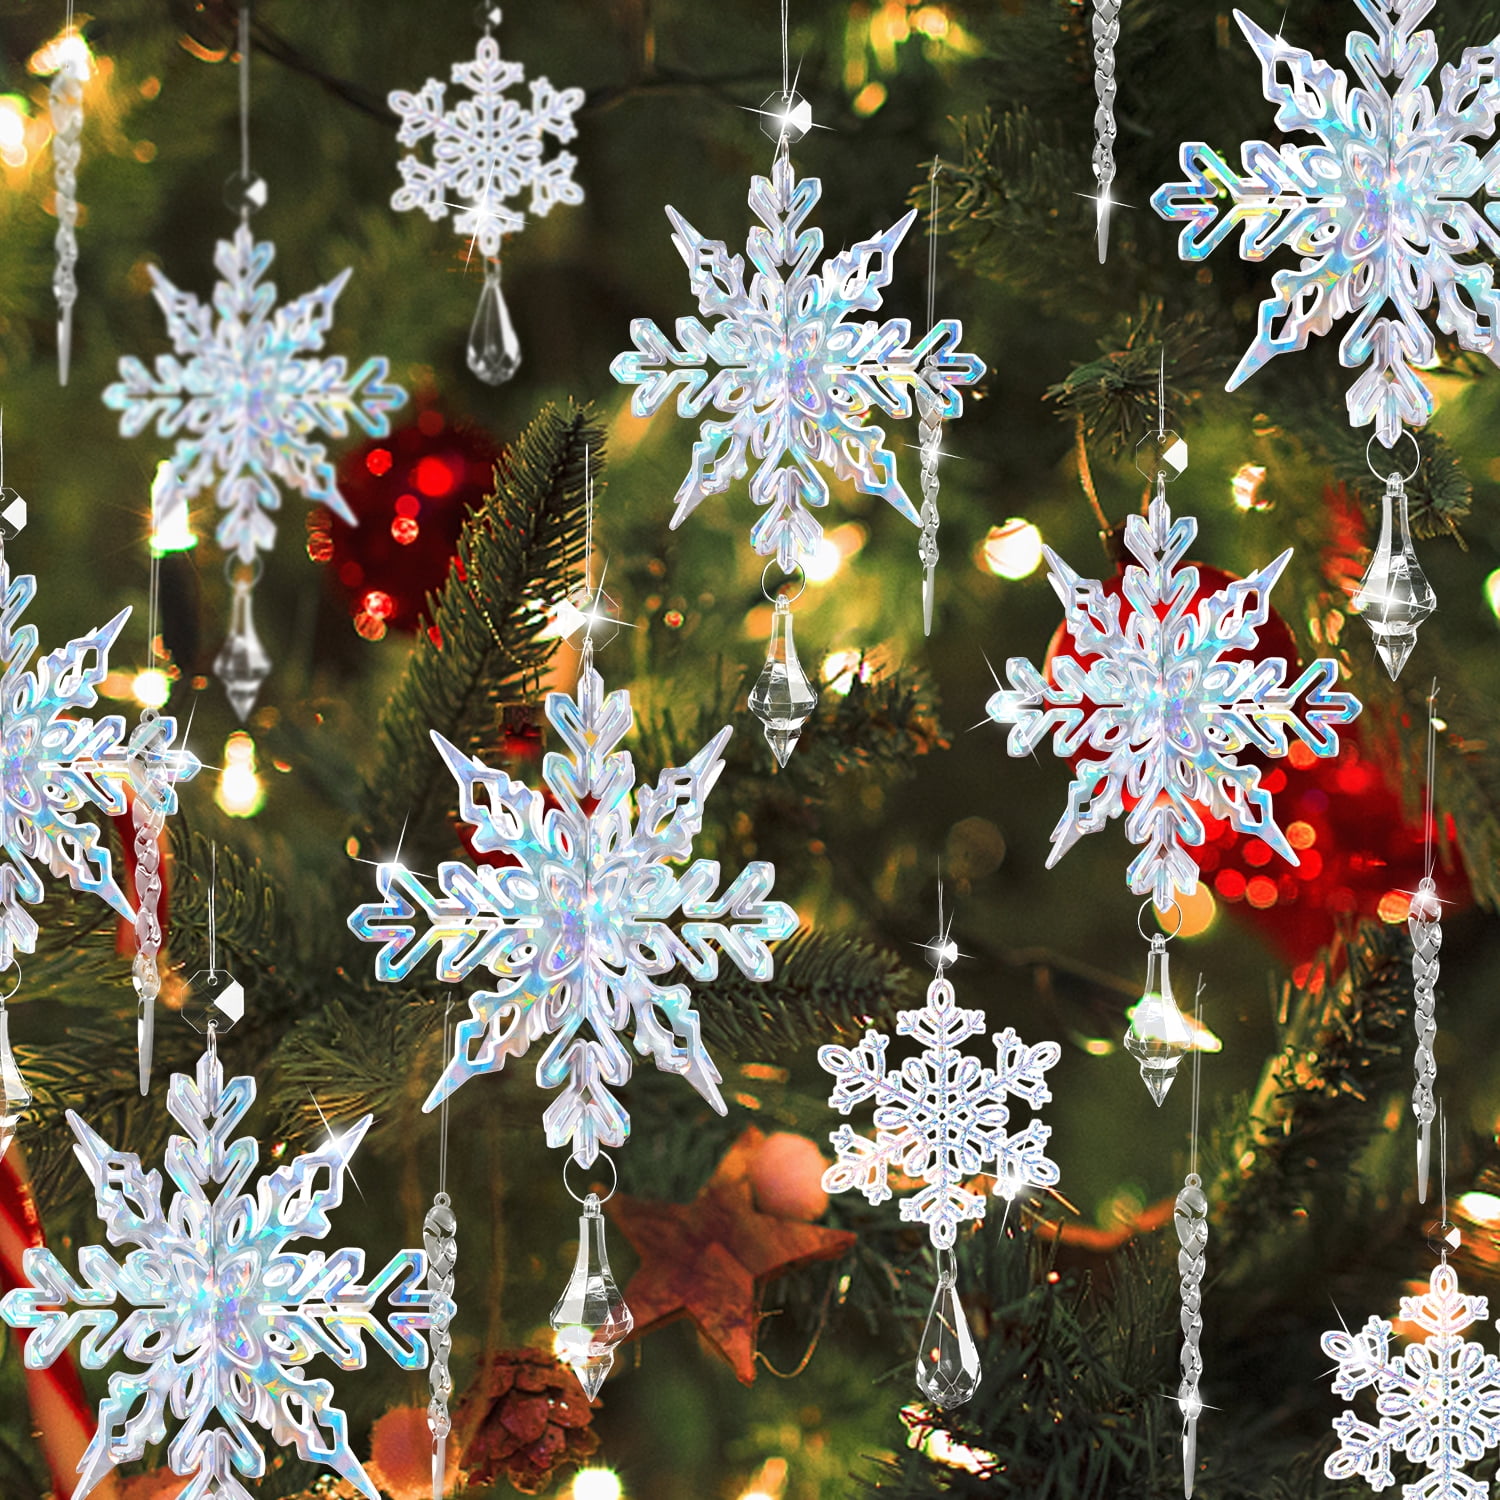 Small Clear Acrylic Snowflake Ornaments - Snow - Snowflakes